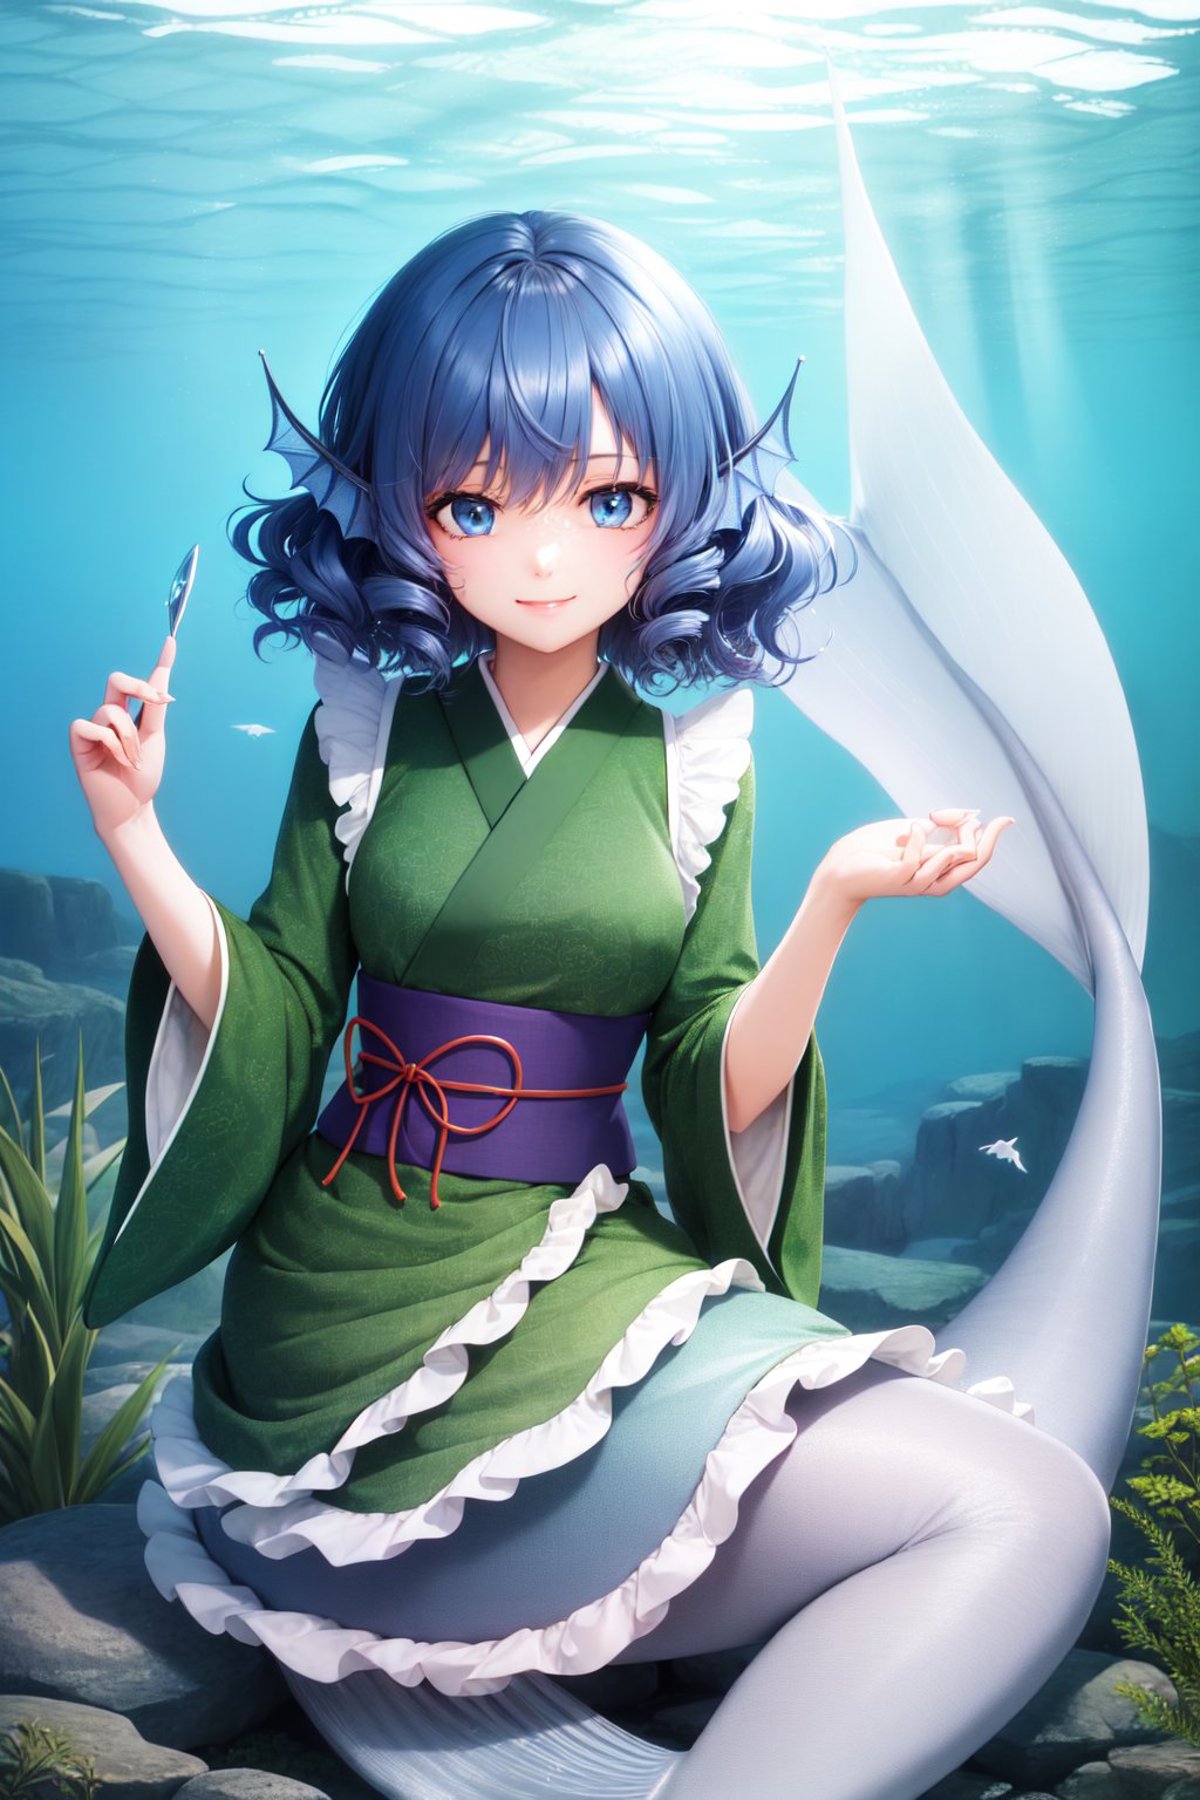 Wakasagihime | Touhou image by justTNP